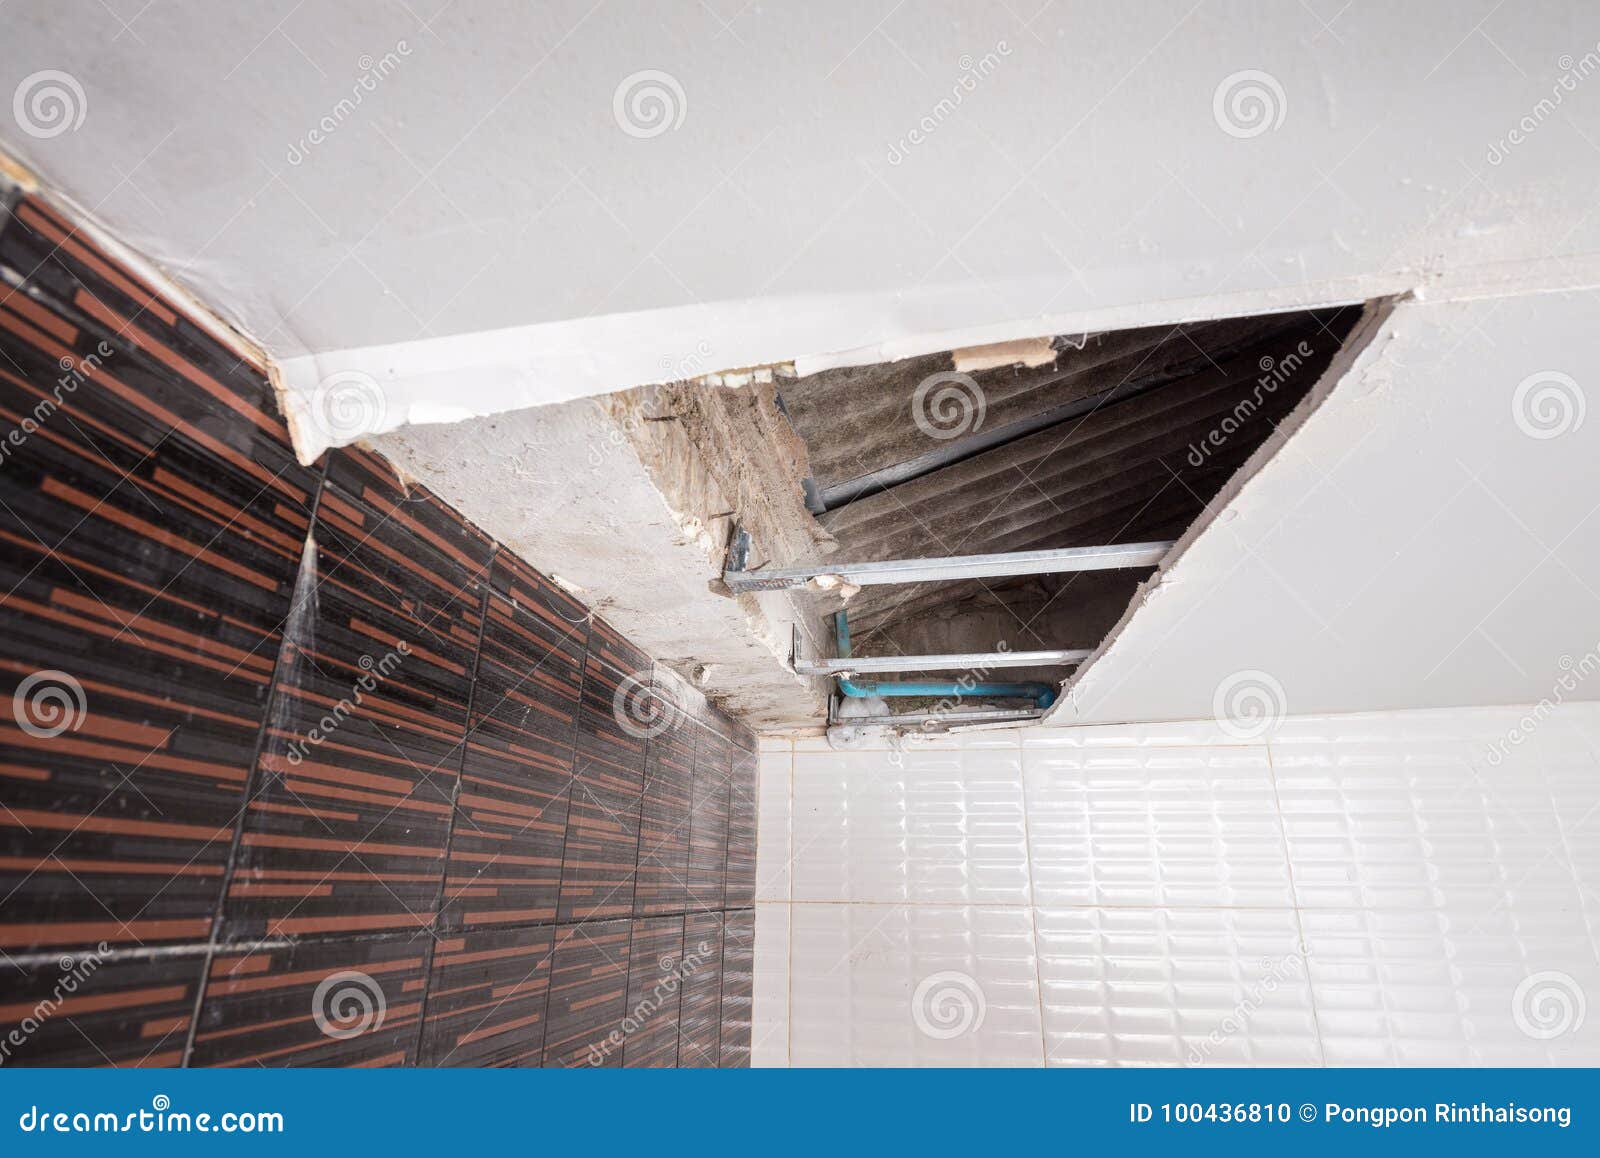 Repairing A Water Leak Damaged Ceiling Stock Photo Image Of